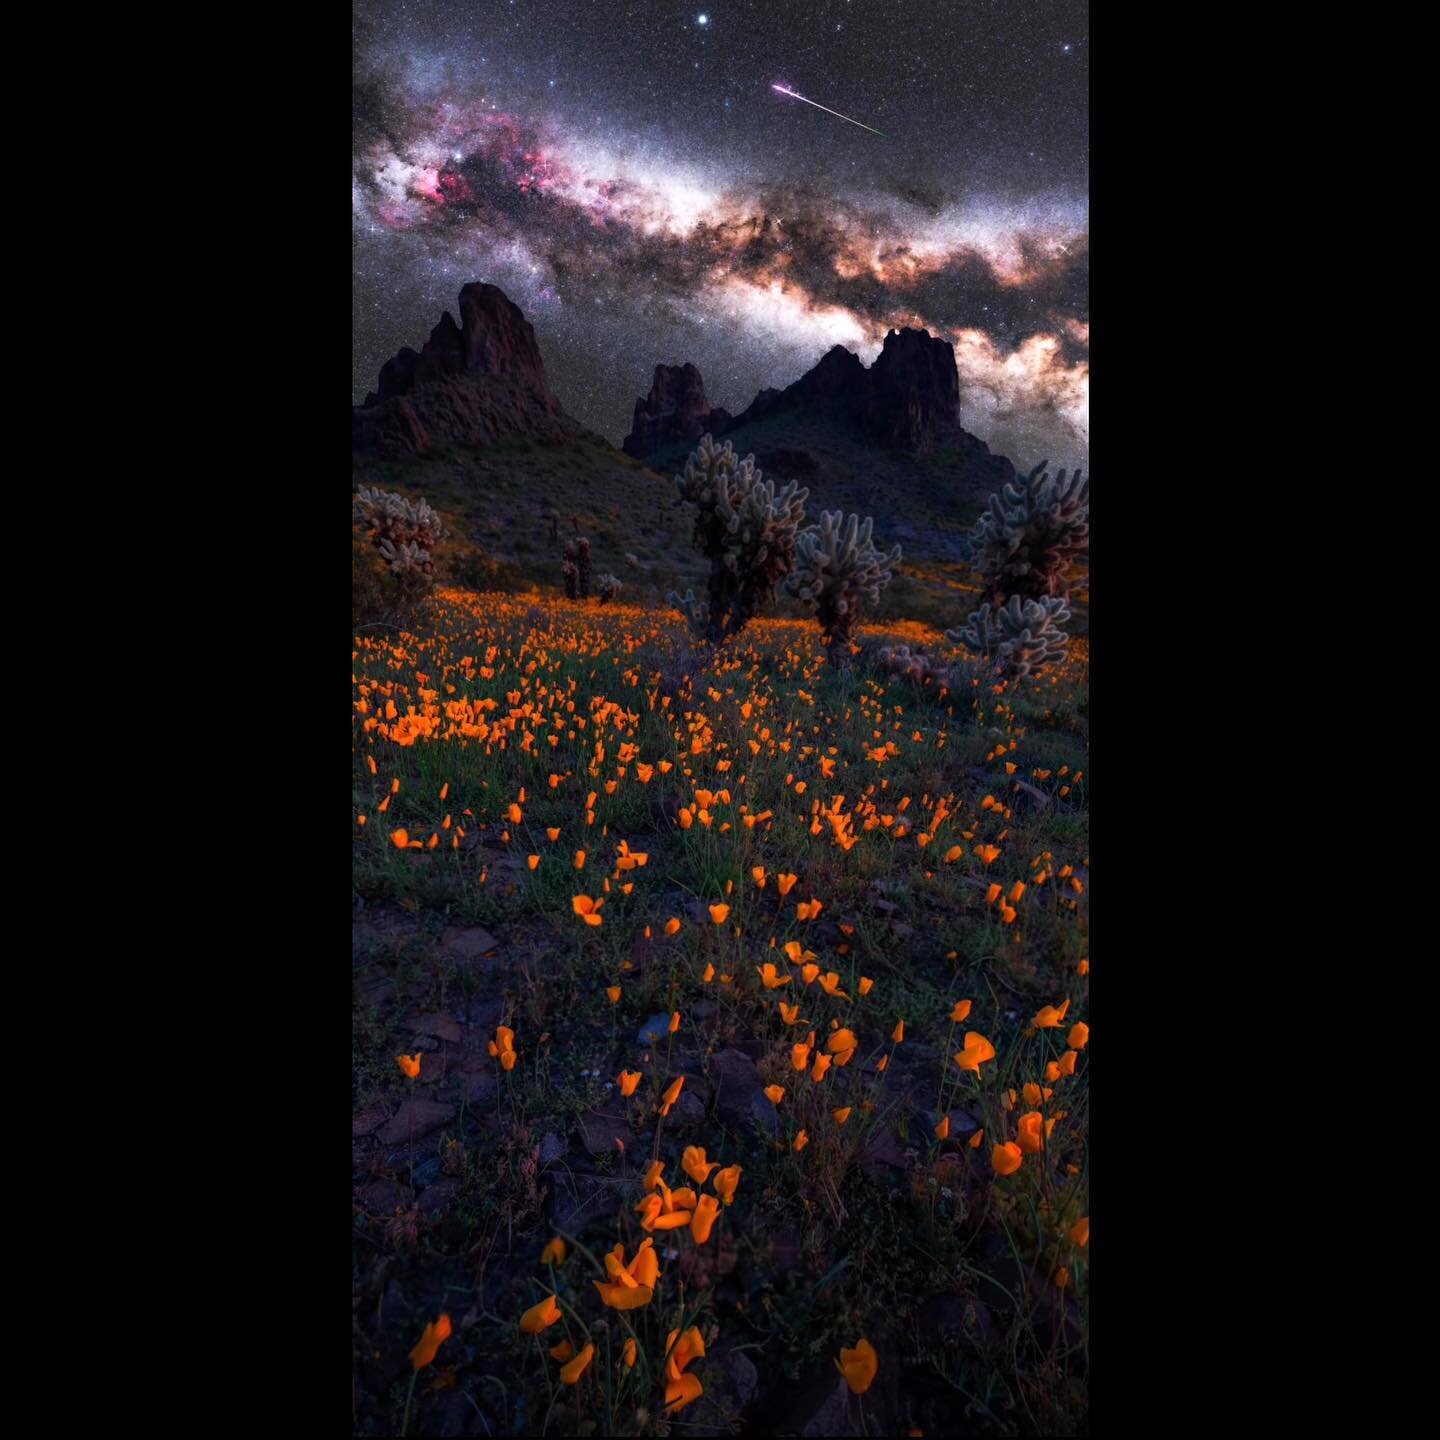 Zoom in. 
Can&rsquo;t stop thinking about this photo by @clanger_mcbanger @roycebairphoto showing Scorpius and the Milky Way churning above Picacho Peak, and the poppy superbloom this spring🥹